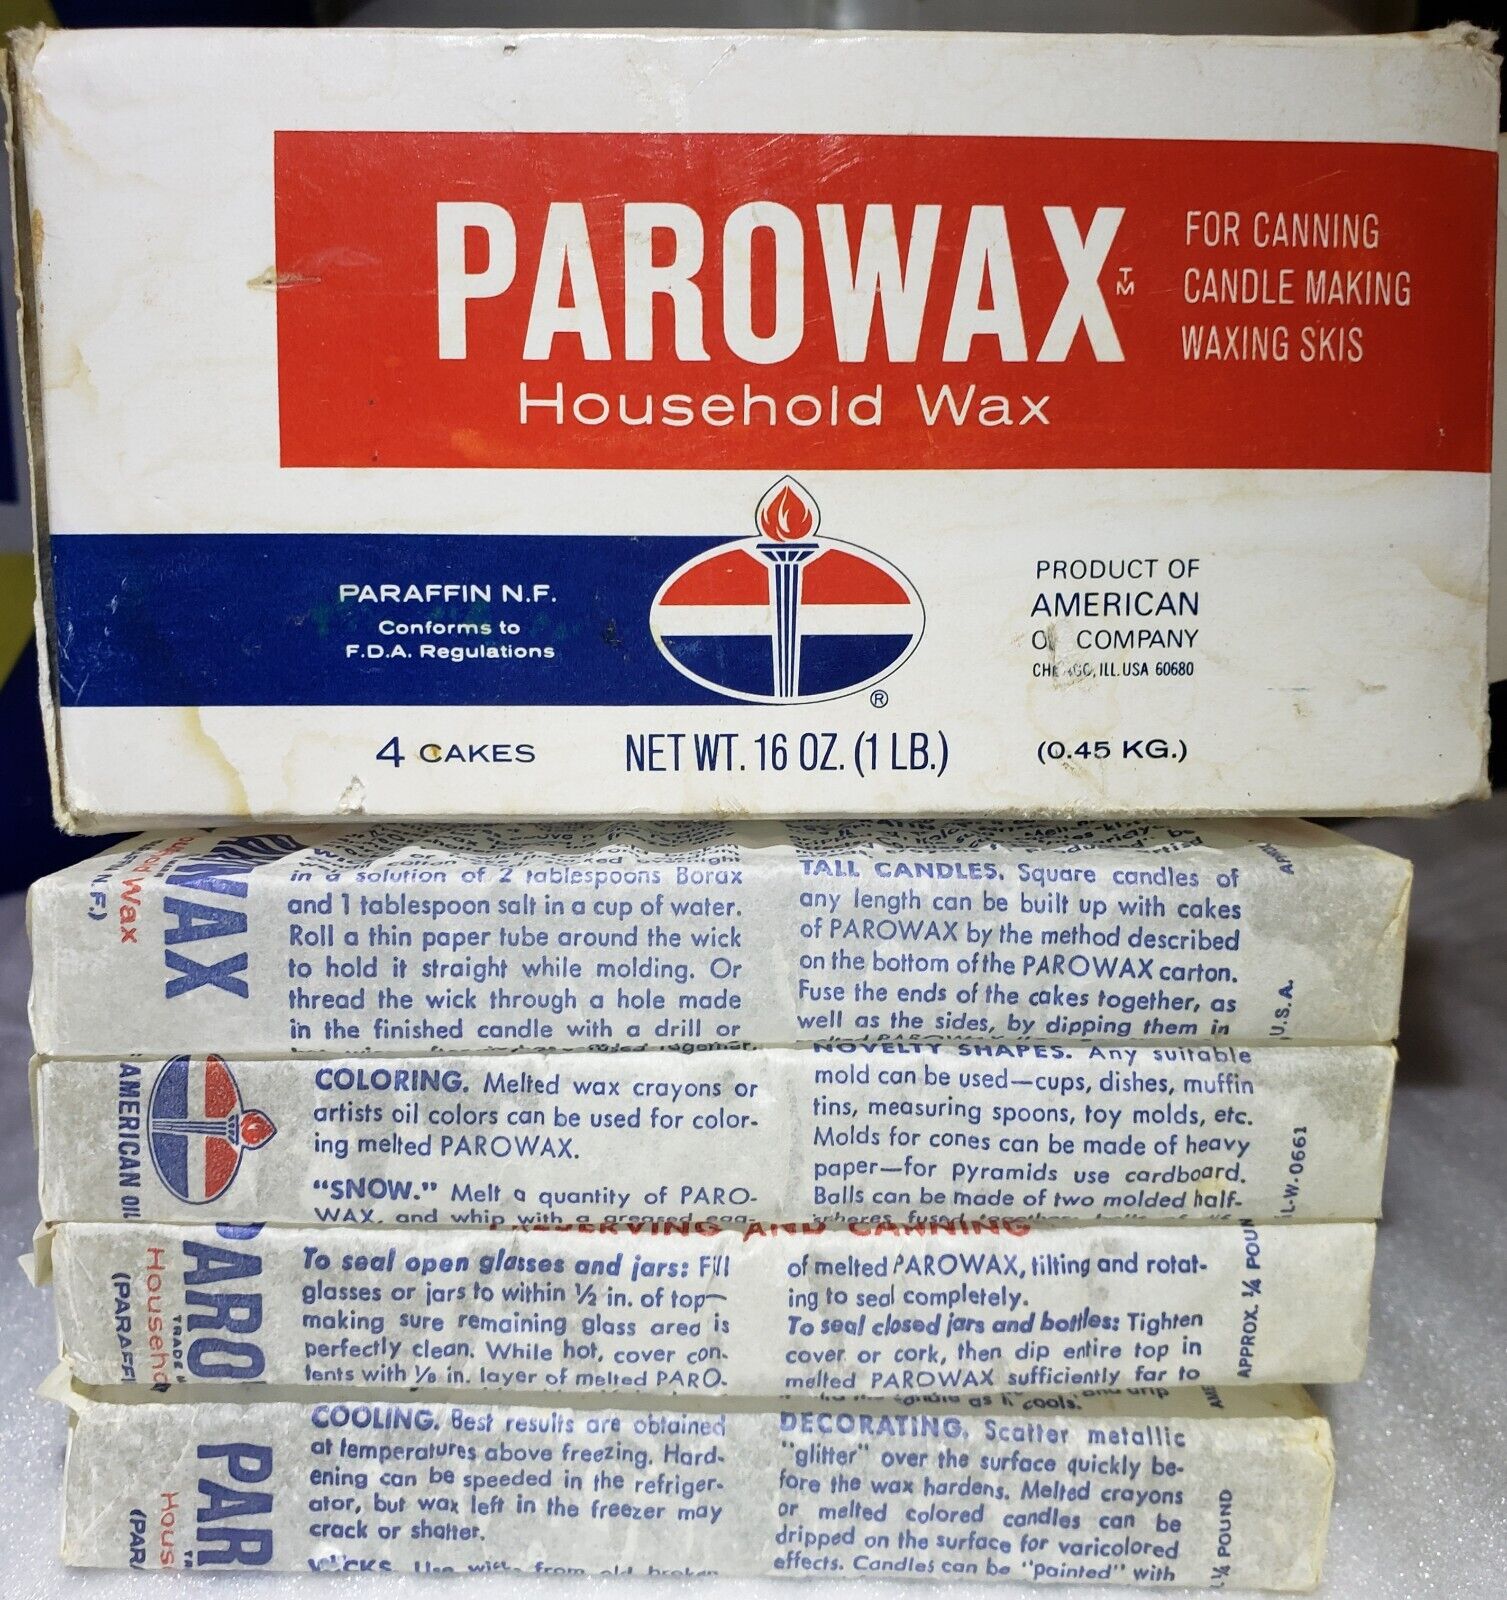 Vintage 1950’s Parowax Household Wax American Oil Company Candle Canning Skis